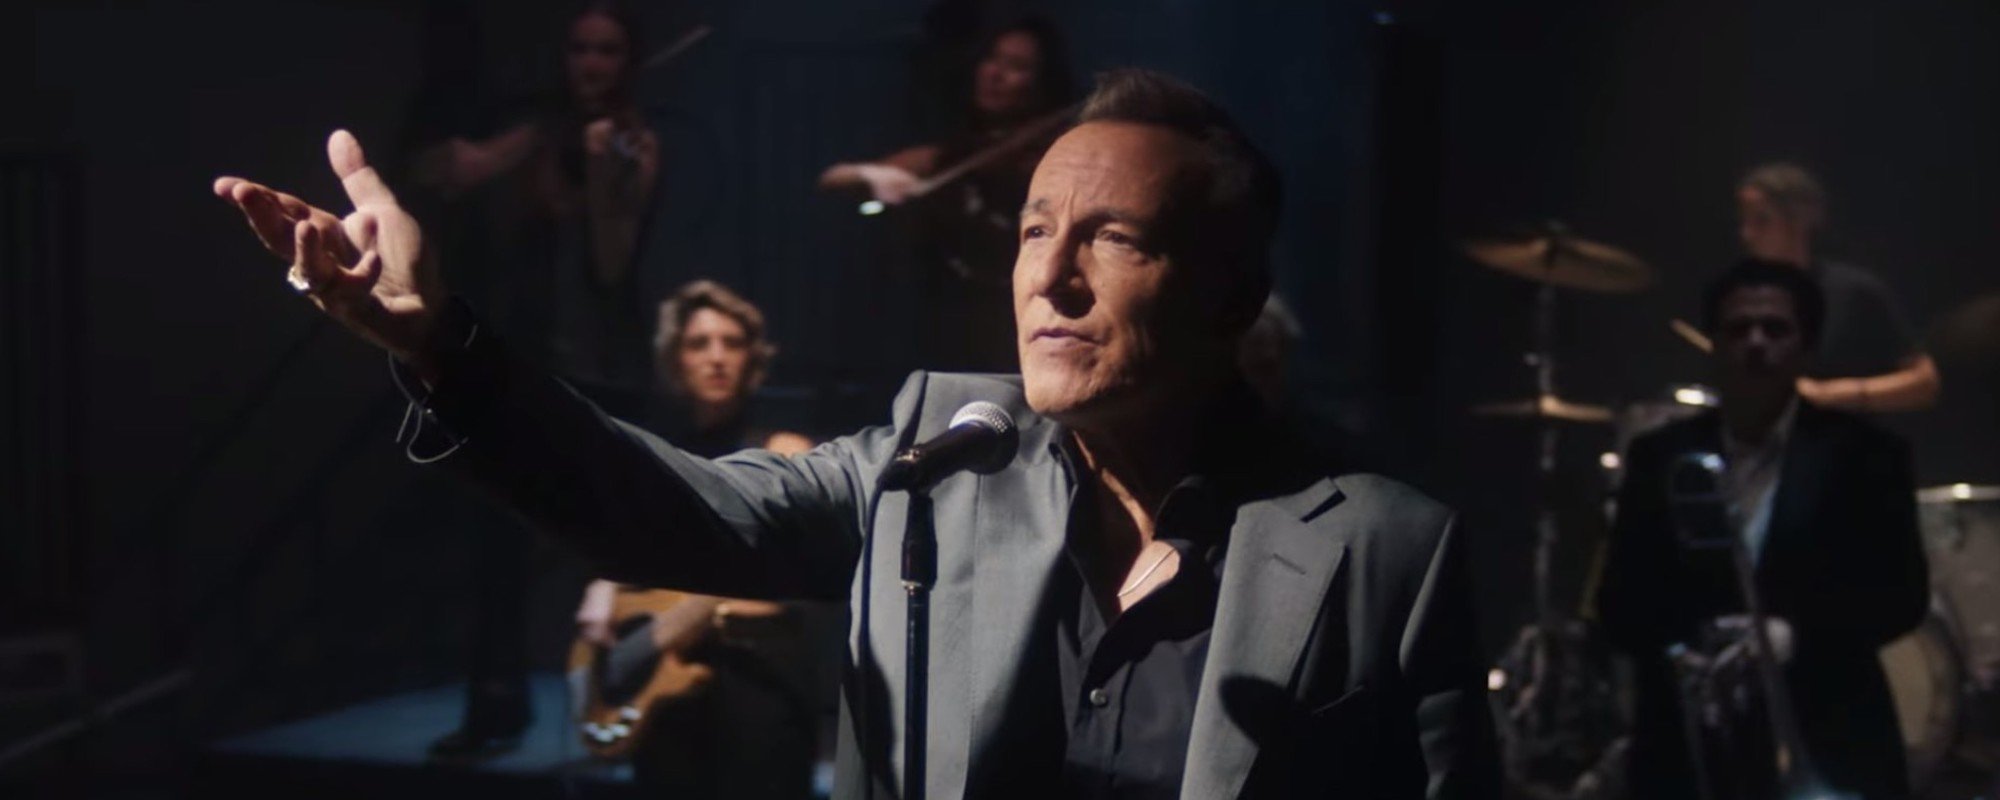 Bruce Springsteen Shares His Rendition of the 1985 Commodores Classic “Nightshift”